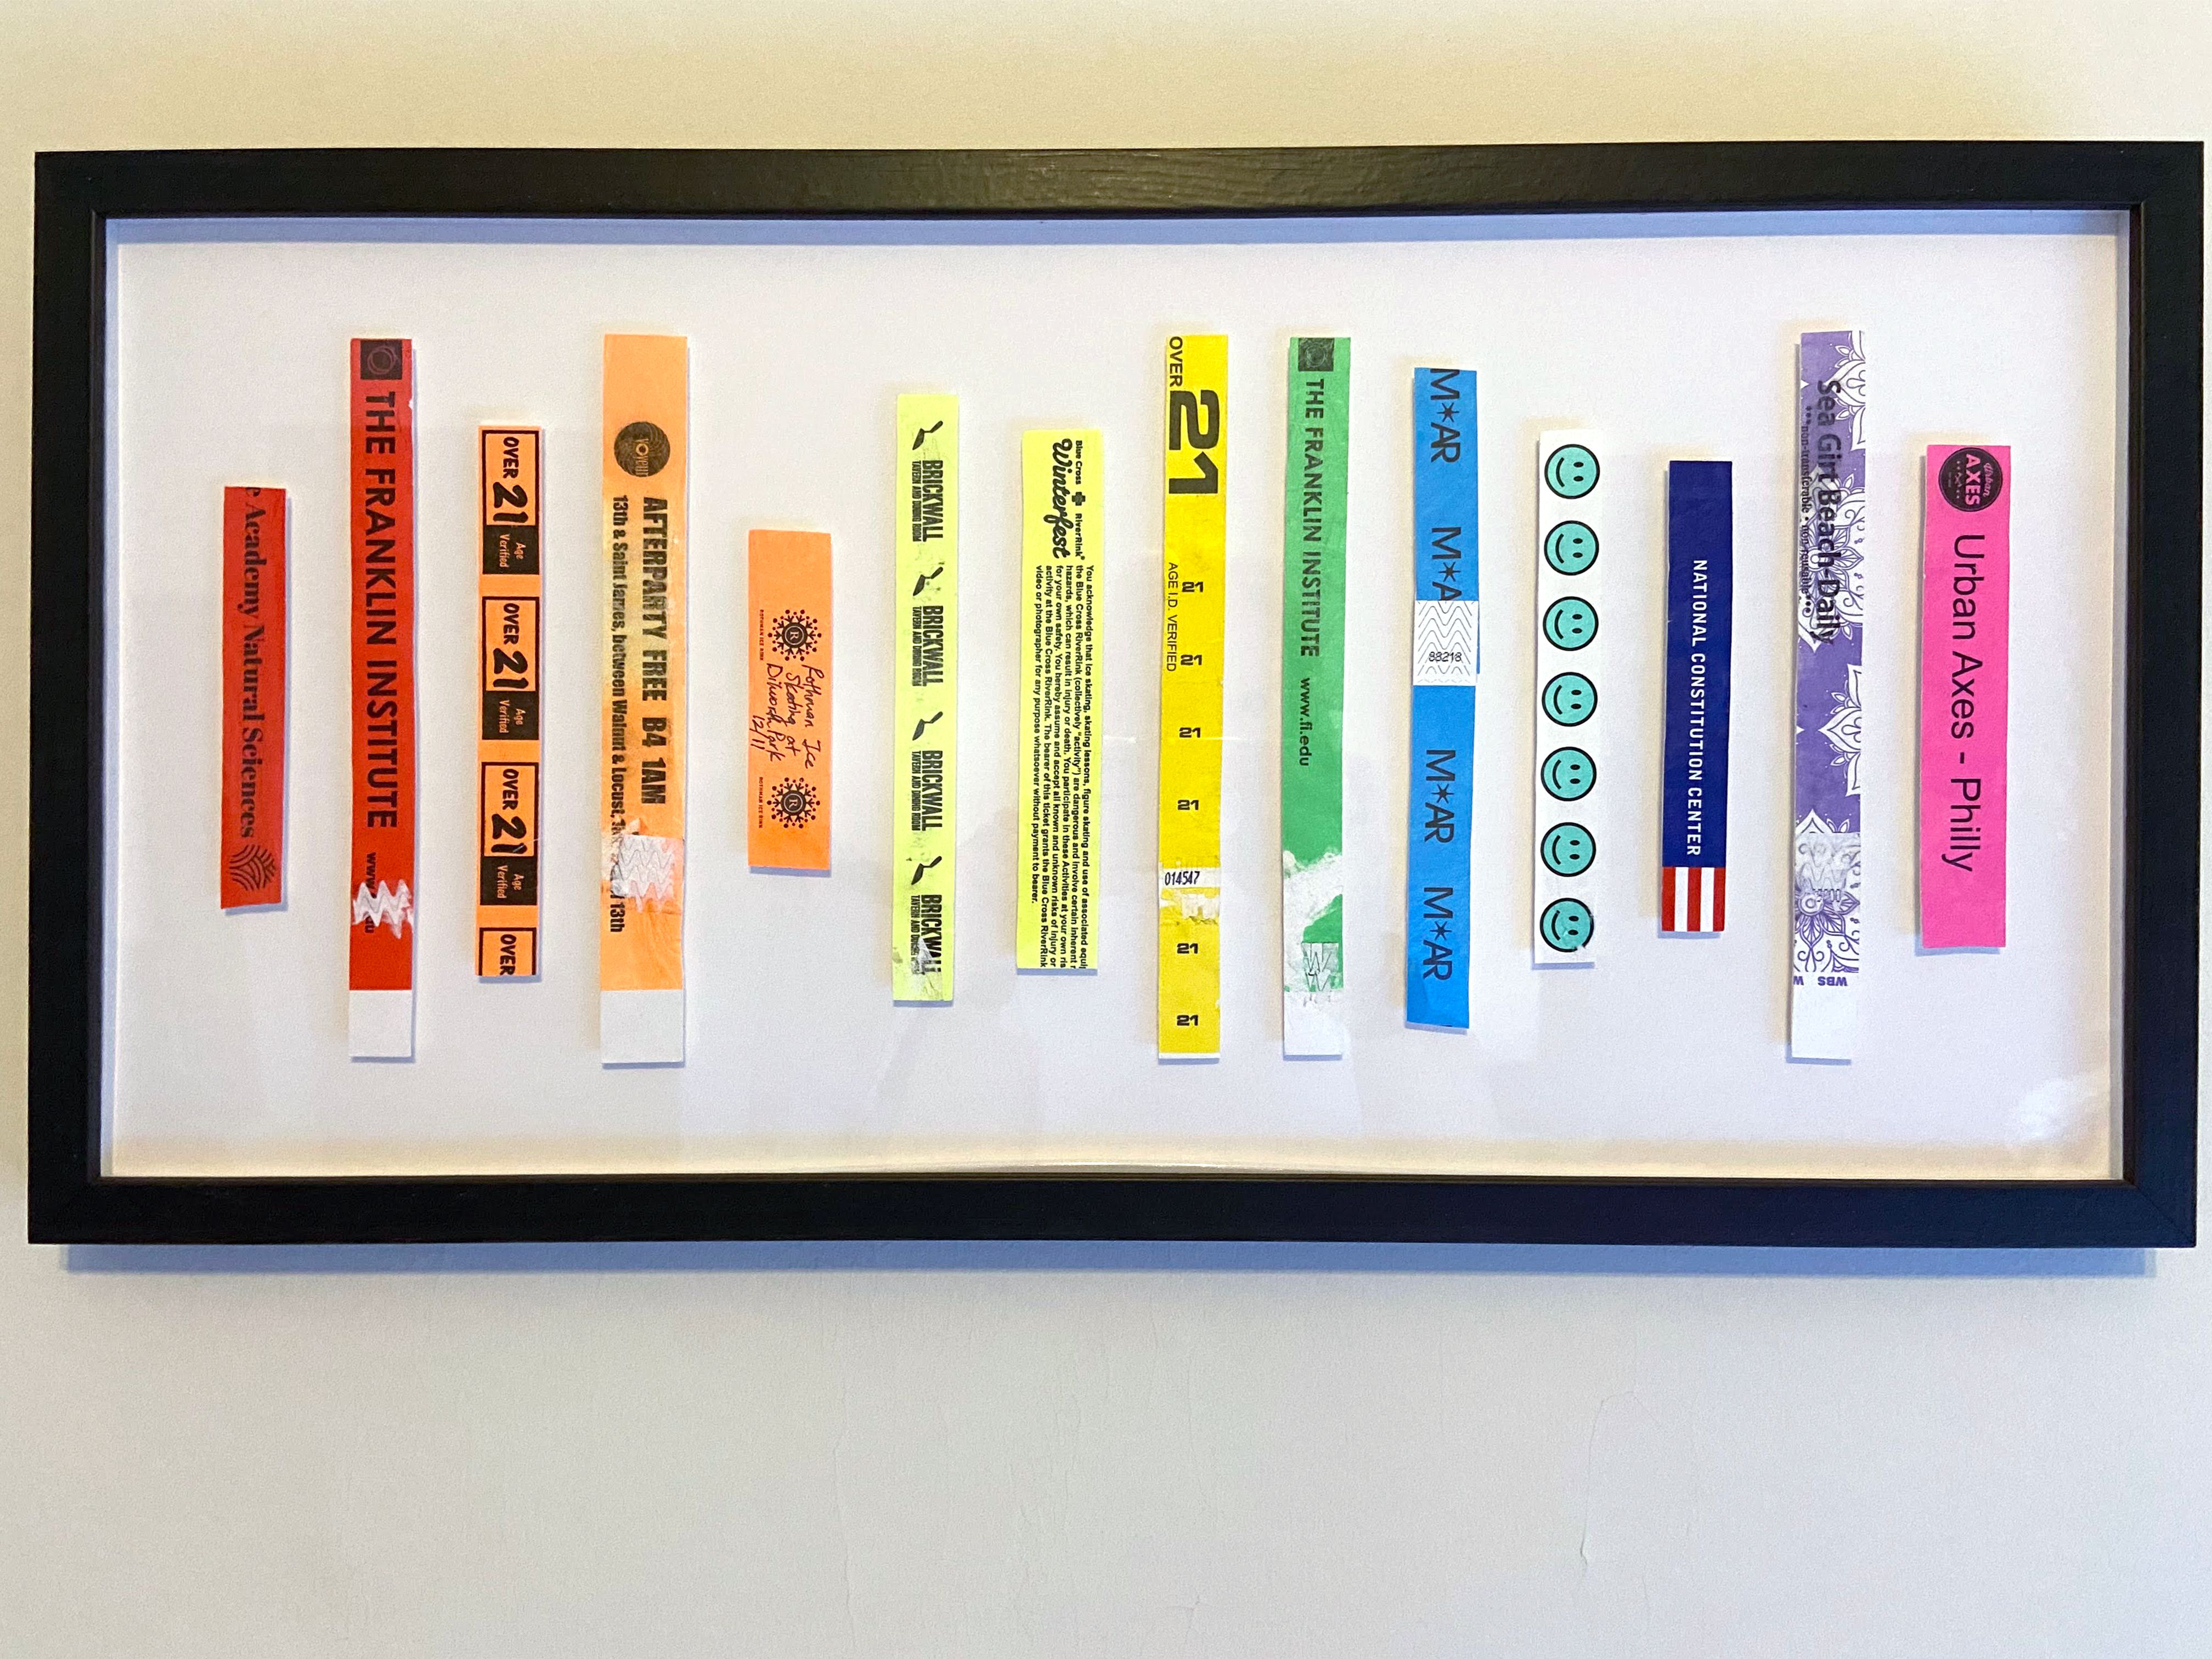 Framed event bracelets in rainbow layout.